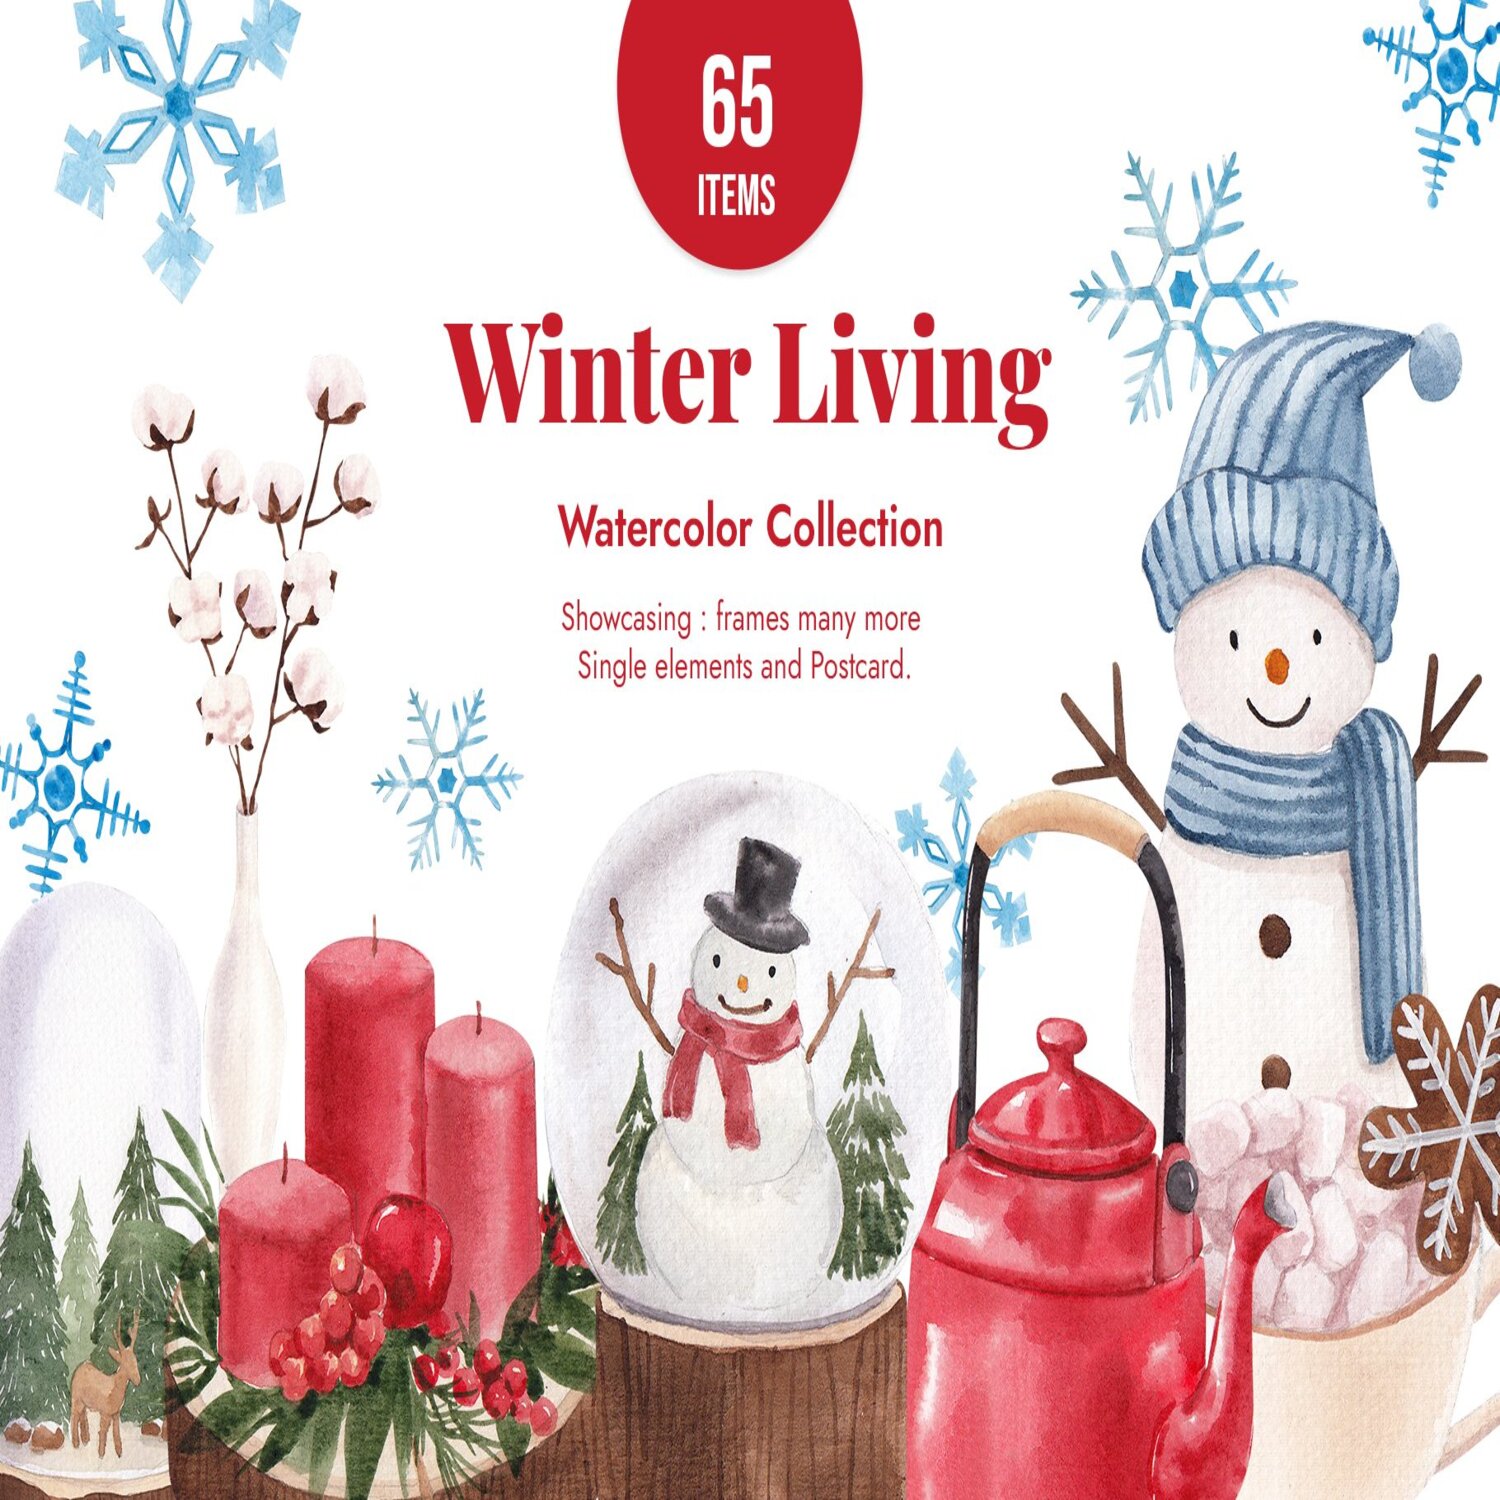 Winter Living Watercolor cover.